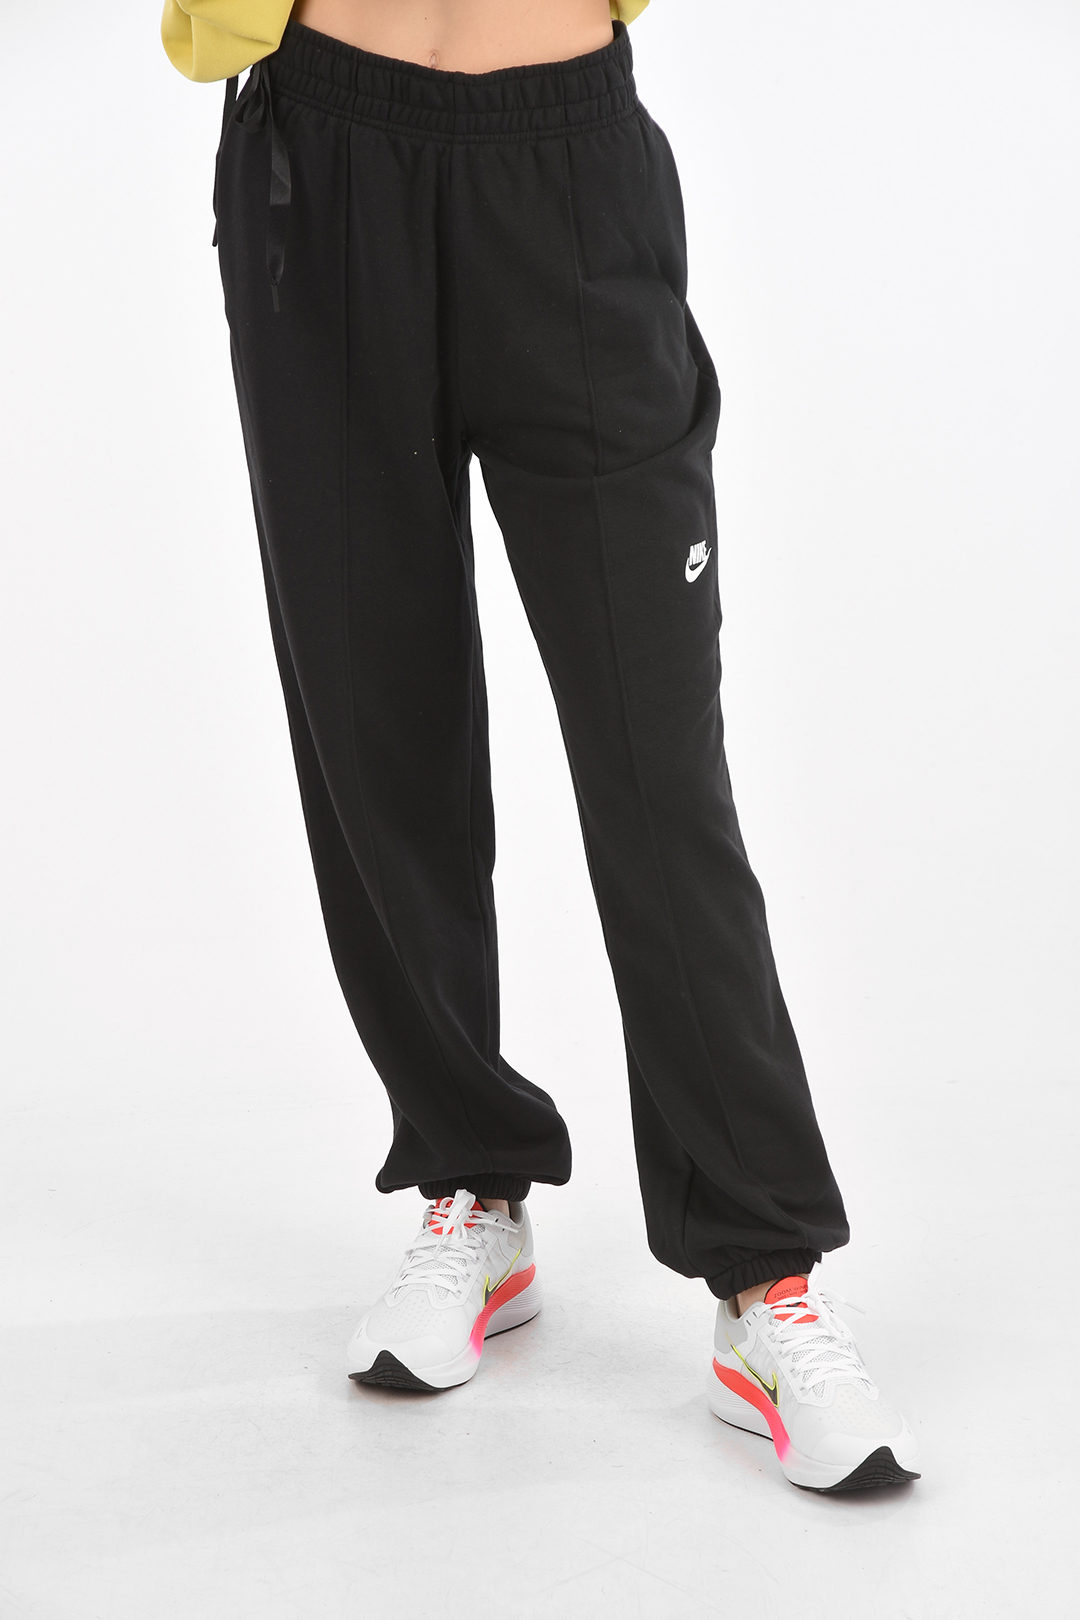 Nike Loose Fit Joggers women - Glamood Outlet